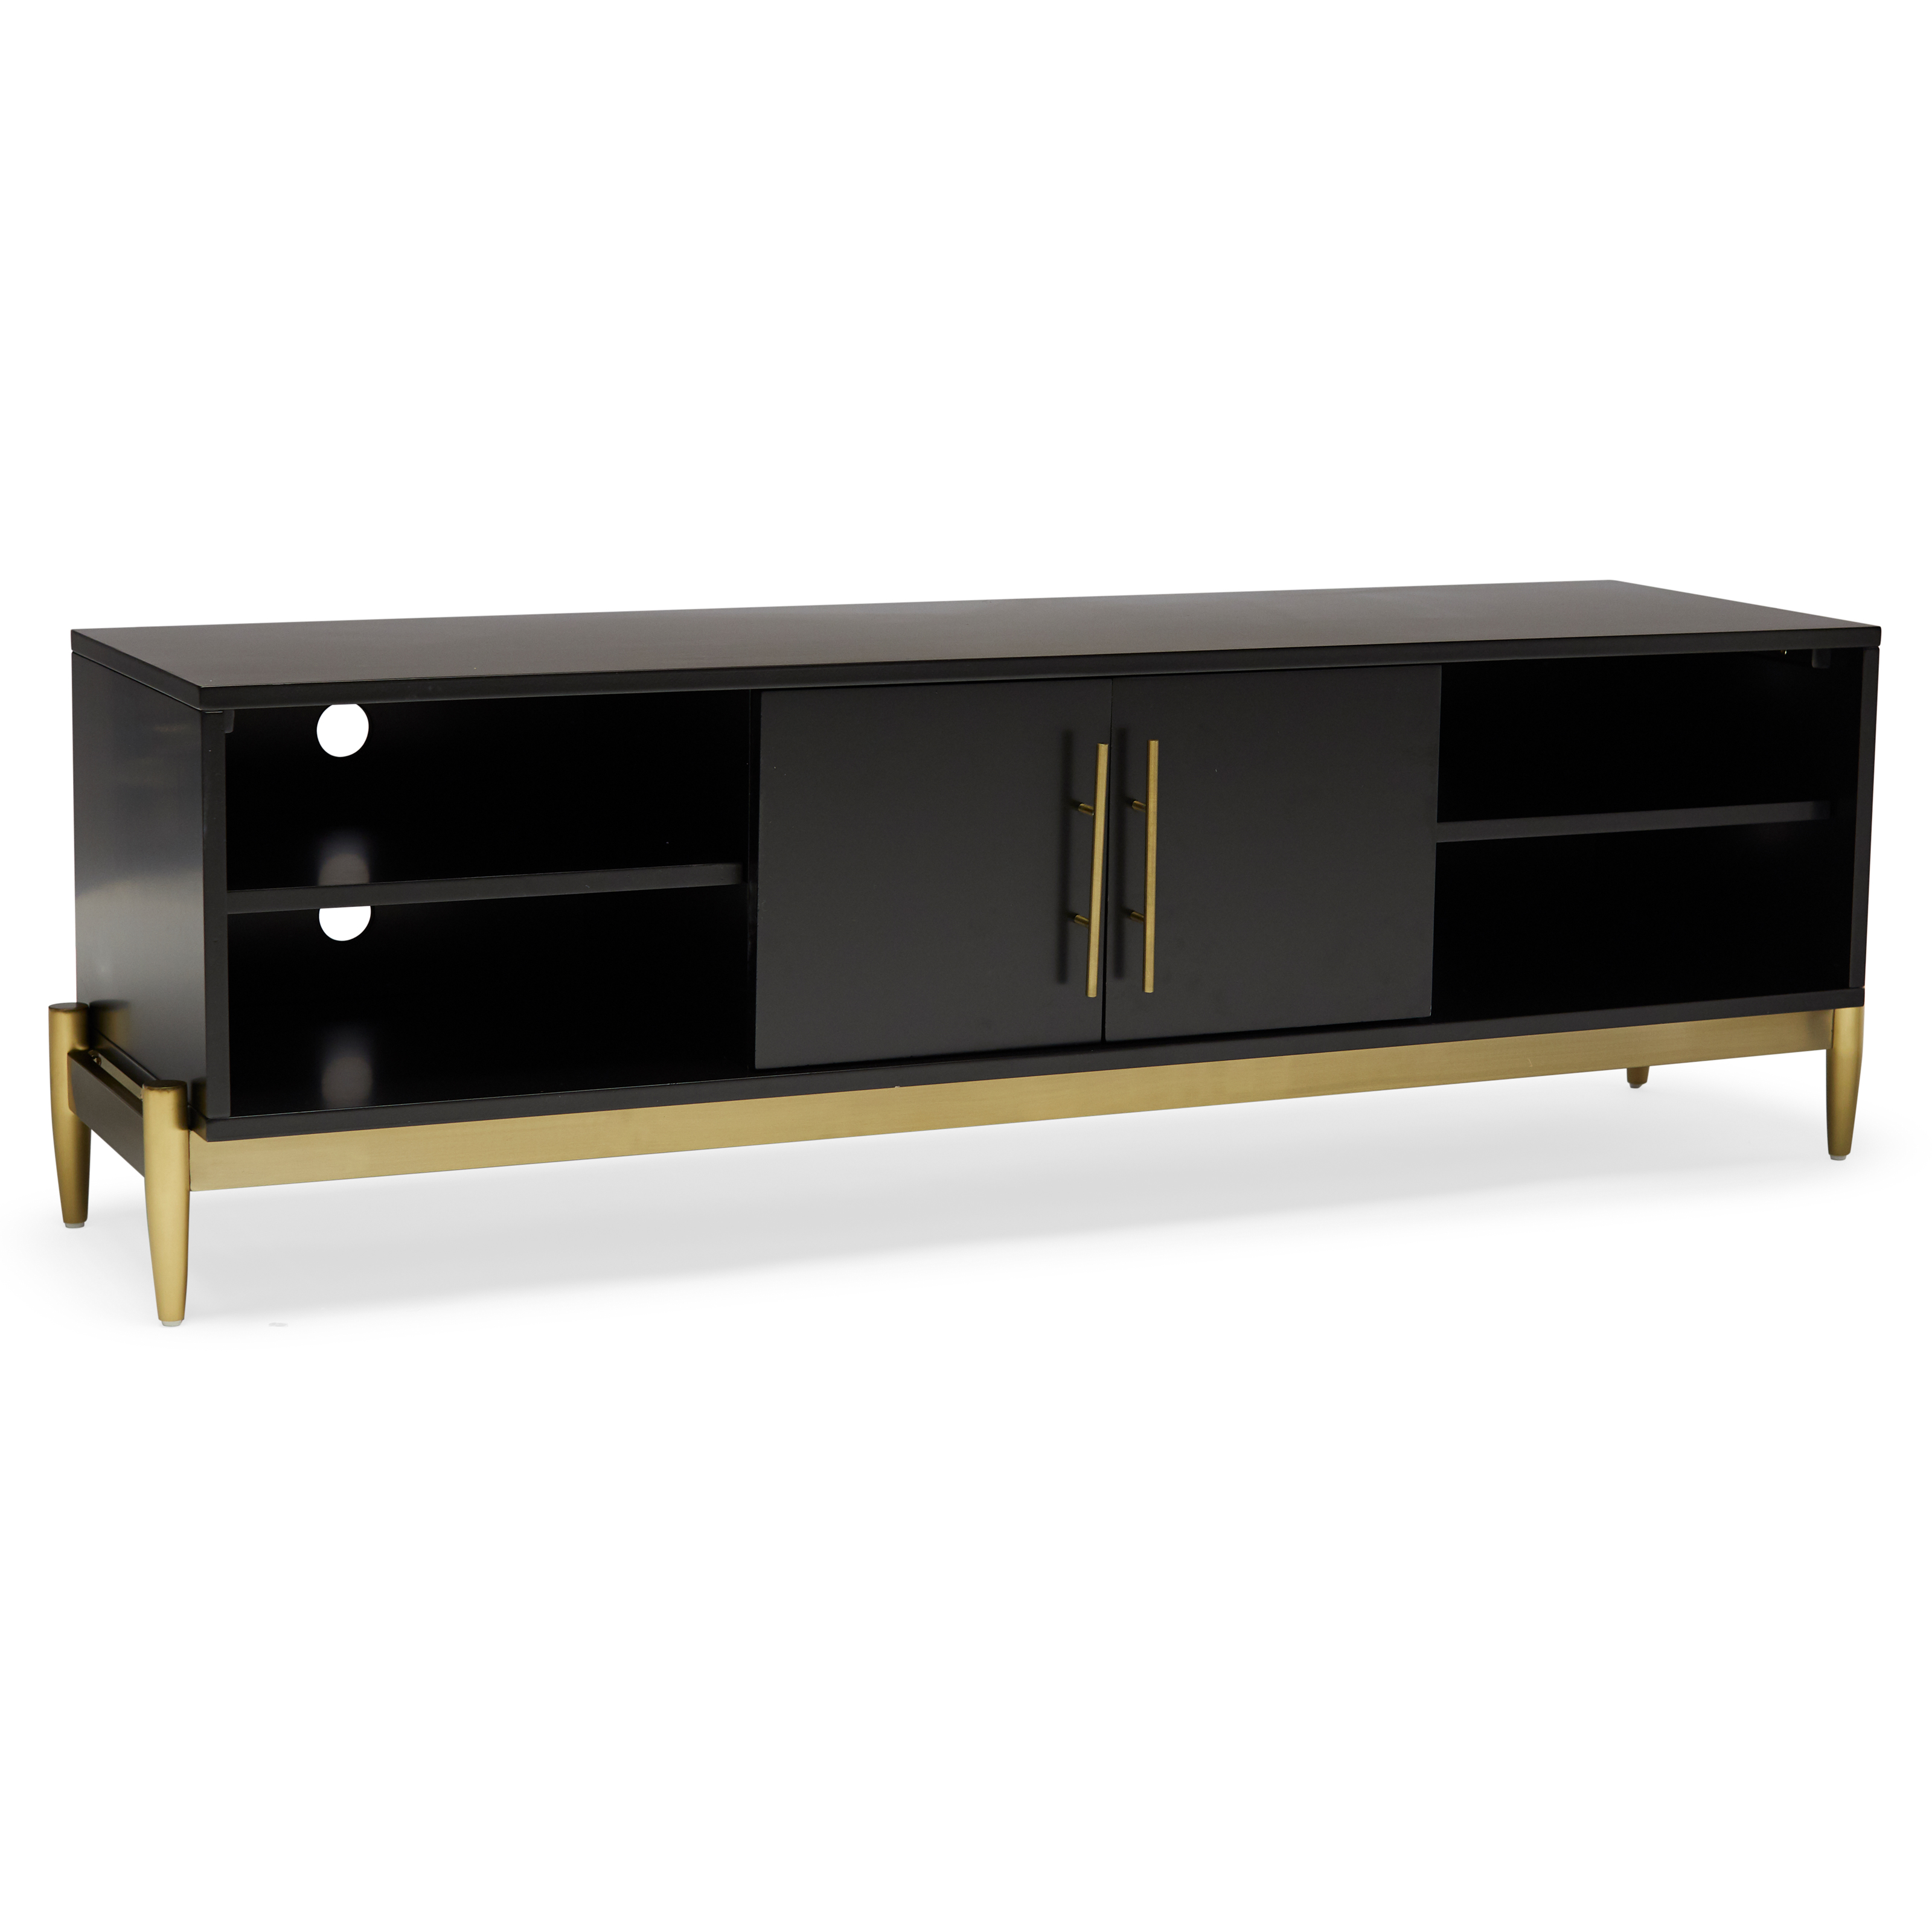 MoDRN Neo Luxury Dylan TV Stand for TVs Up to 65" - image 1 of 9